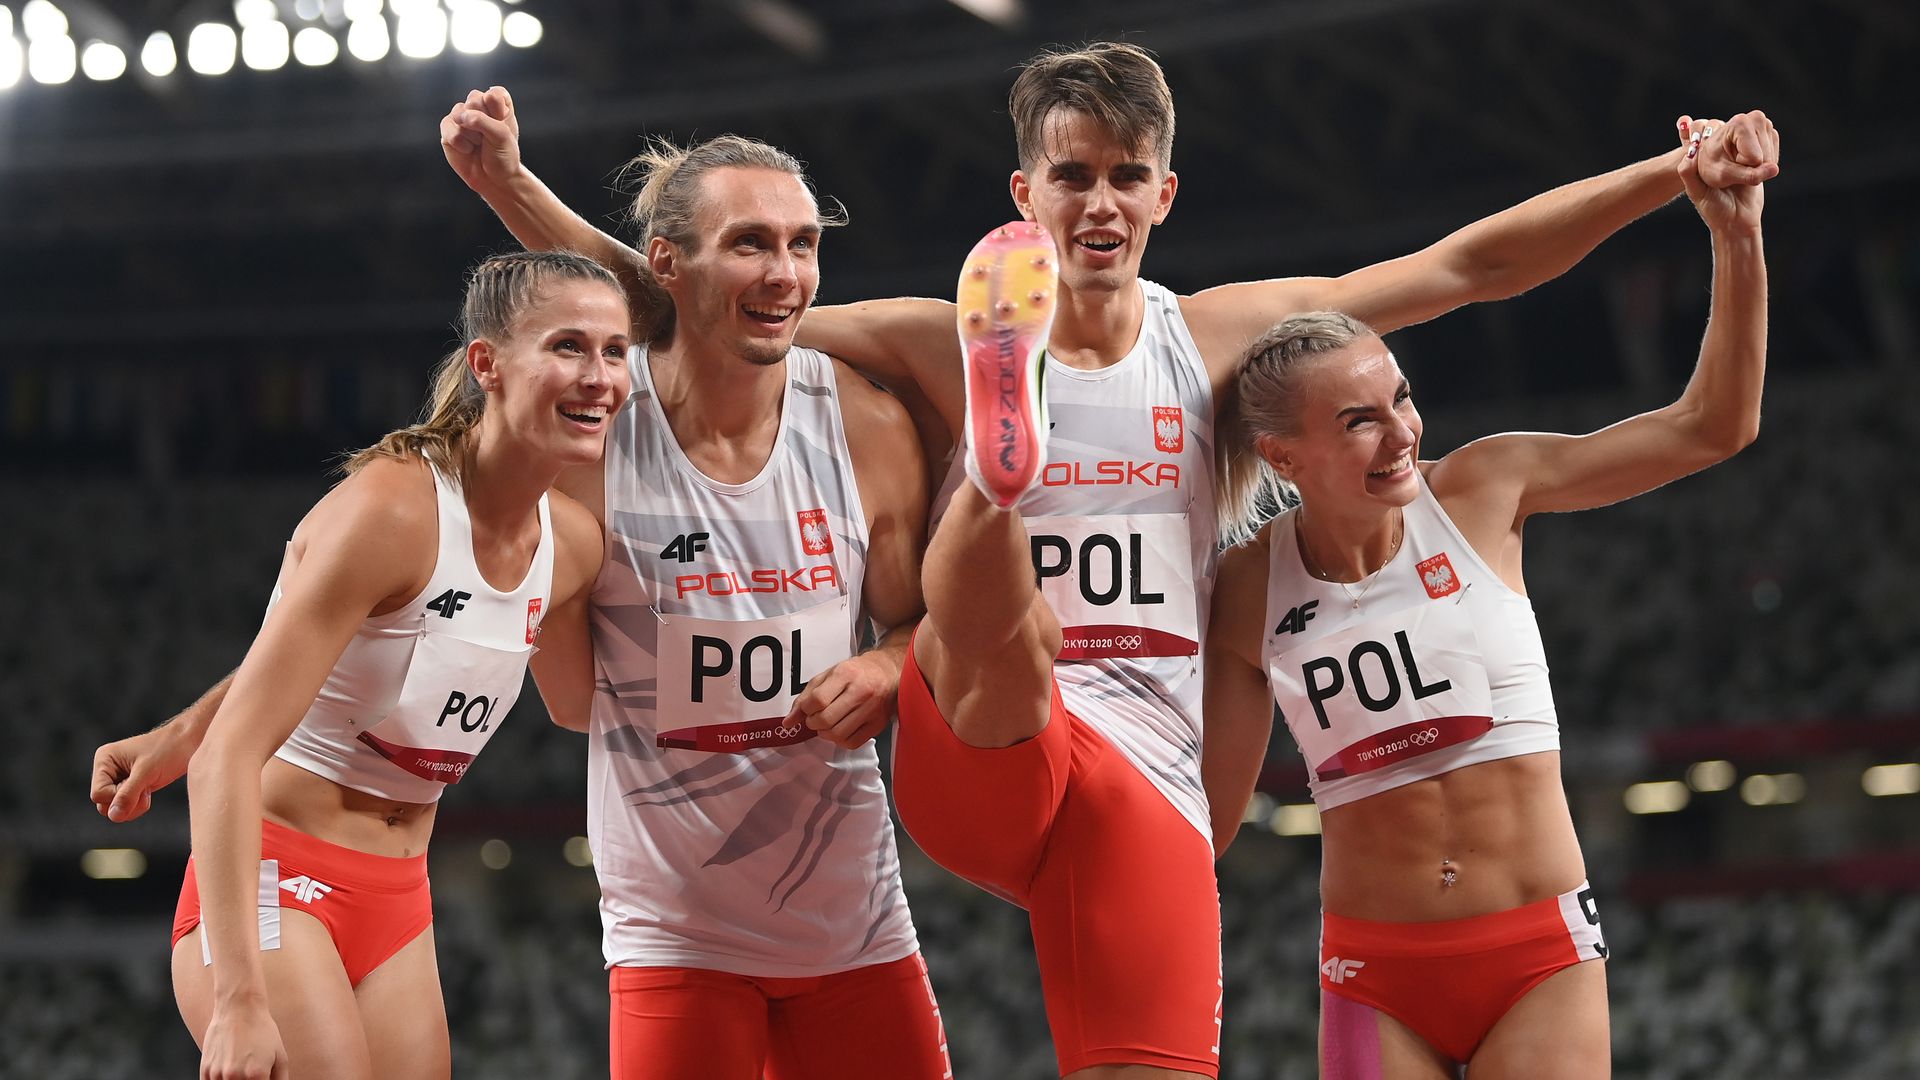 Picture of the Polish track and field mixed relay team